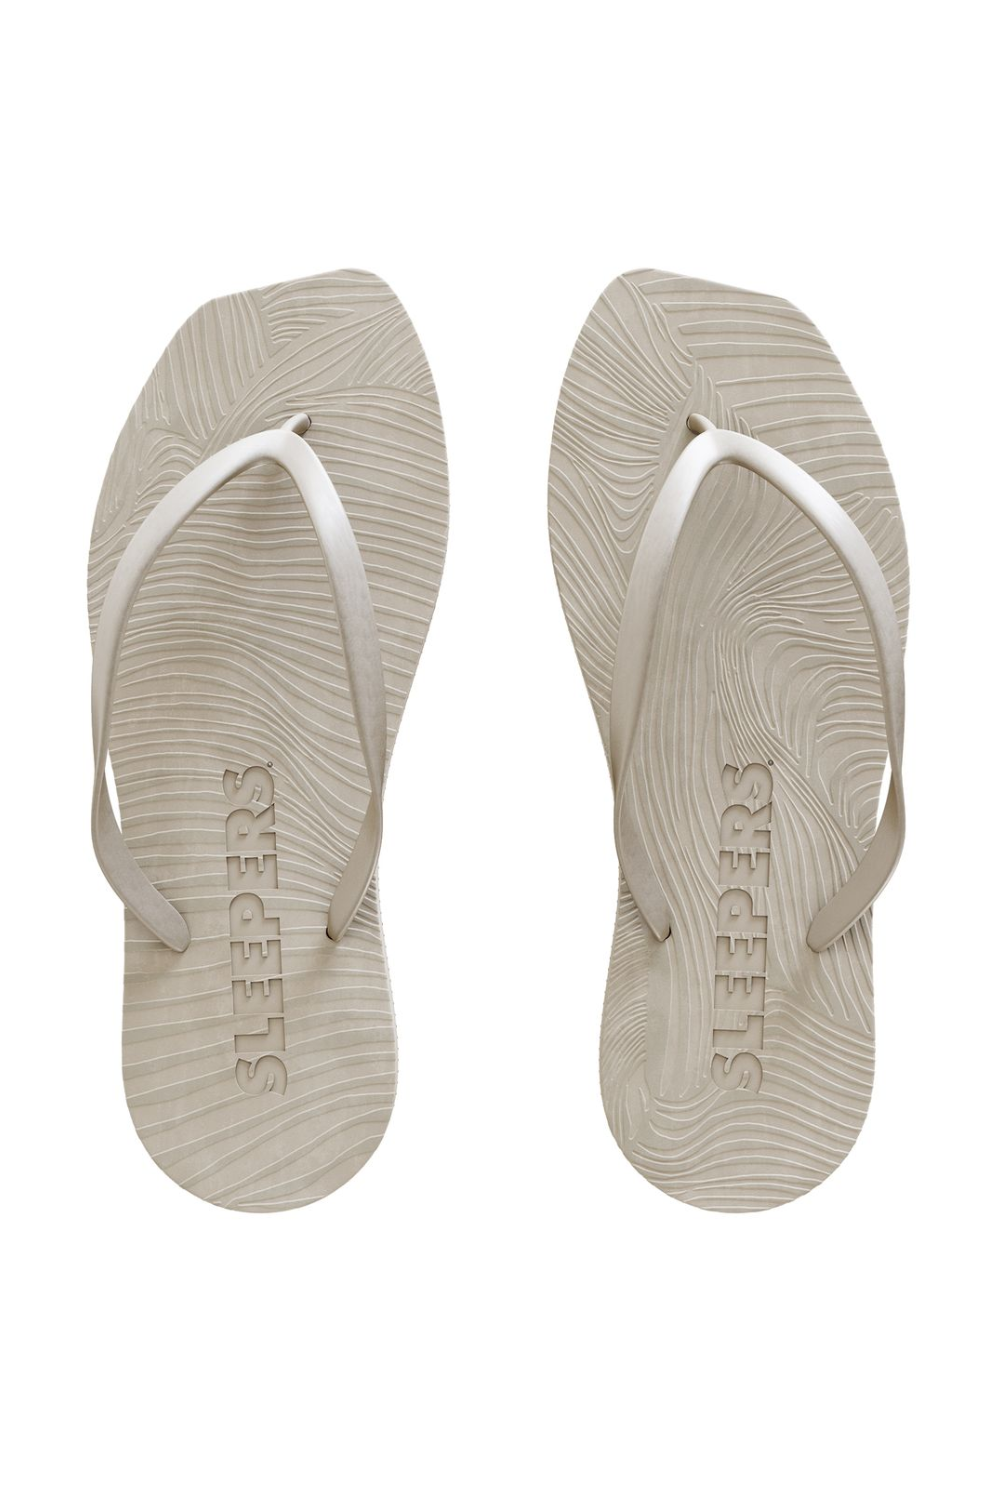 Sleepers Tapered Silver Flip Flop